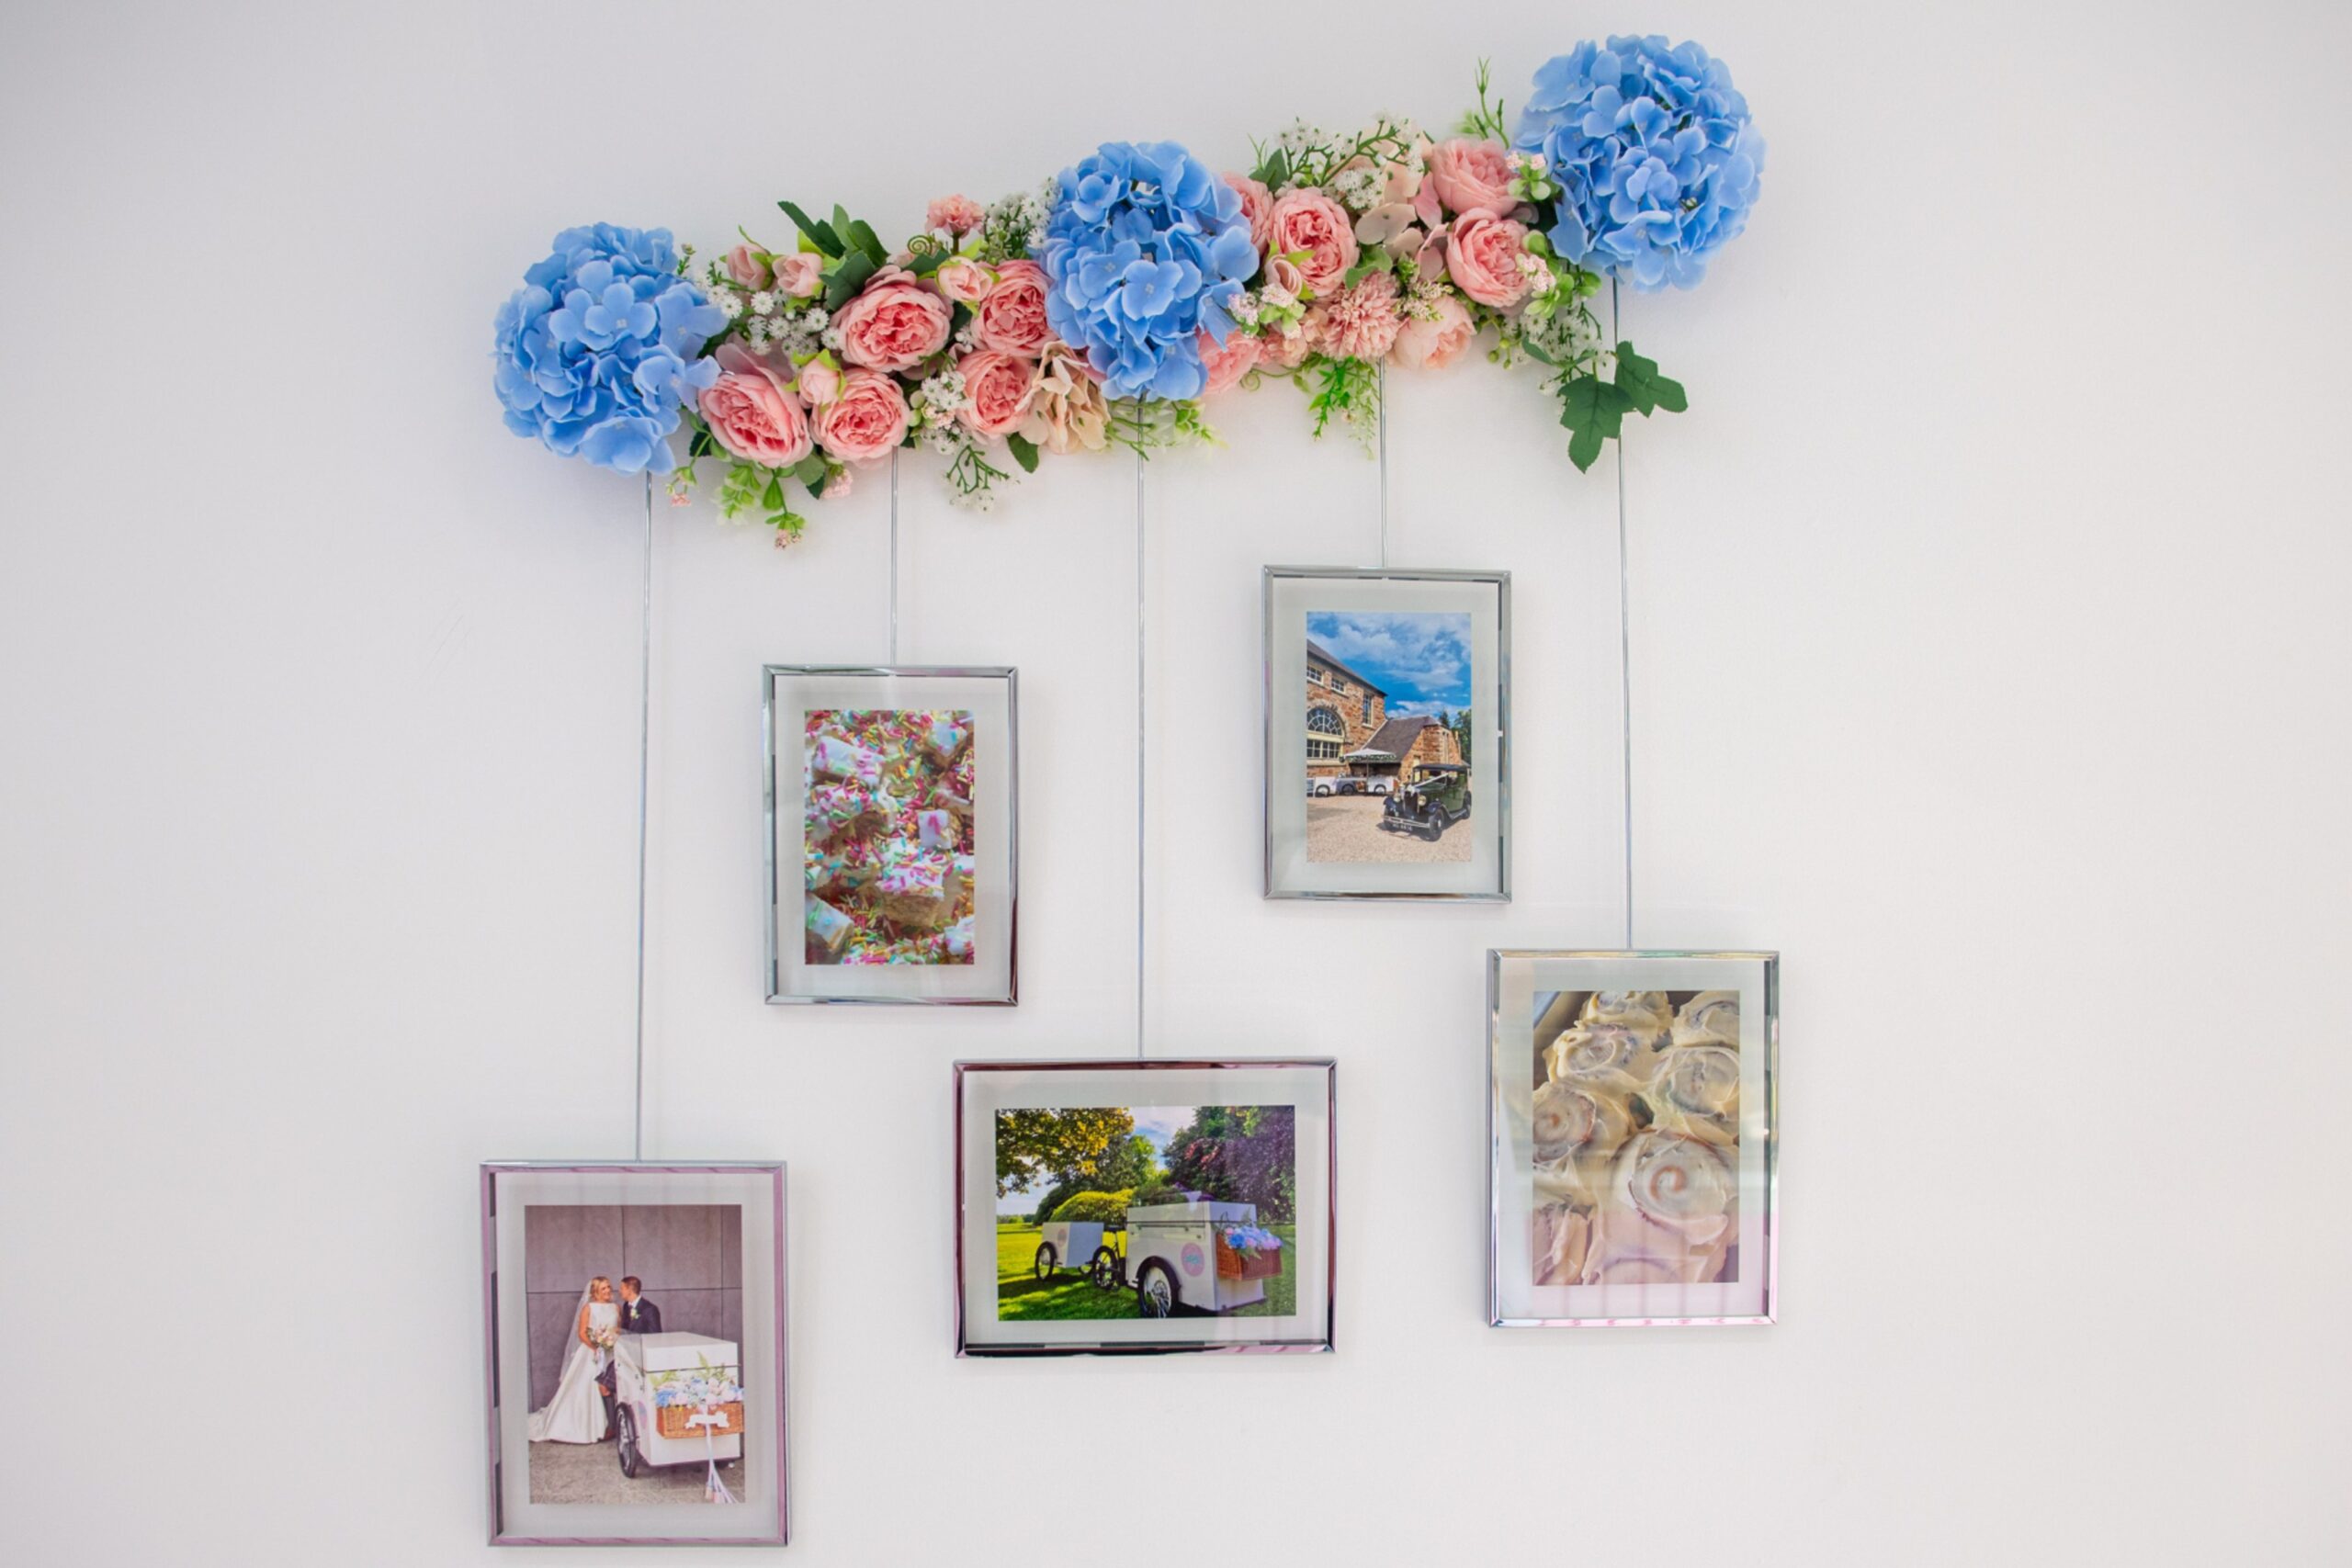 Some of the photos on the wall with floral decorations